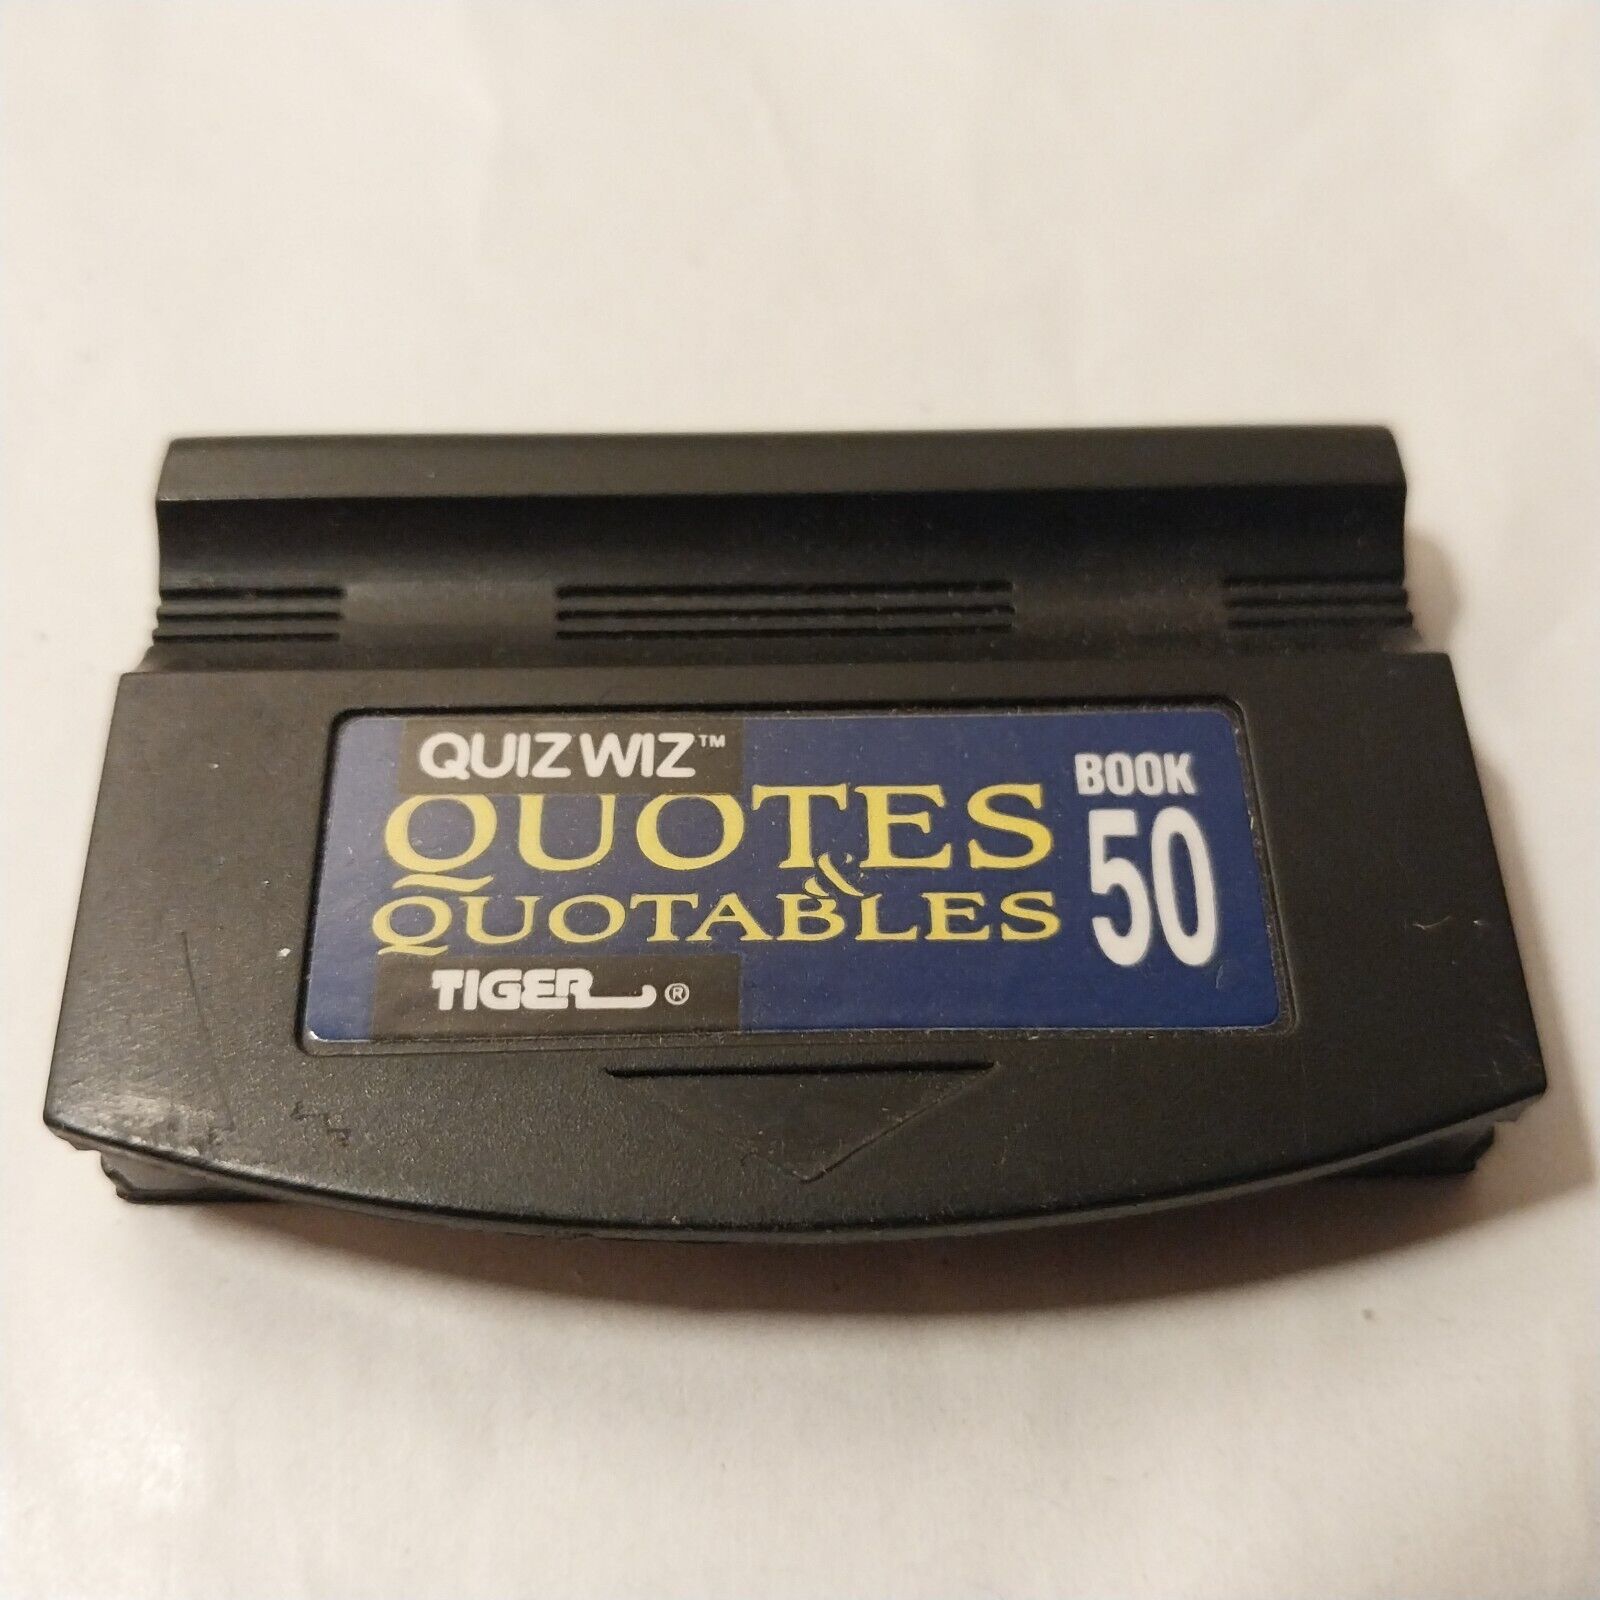 Tiger Electronics Quiz Wiz Quotes & Quotables Book 50 * Answer Cartridge Only * - $8.95